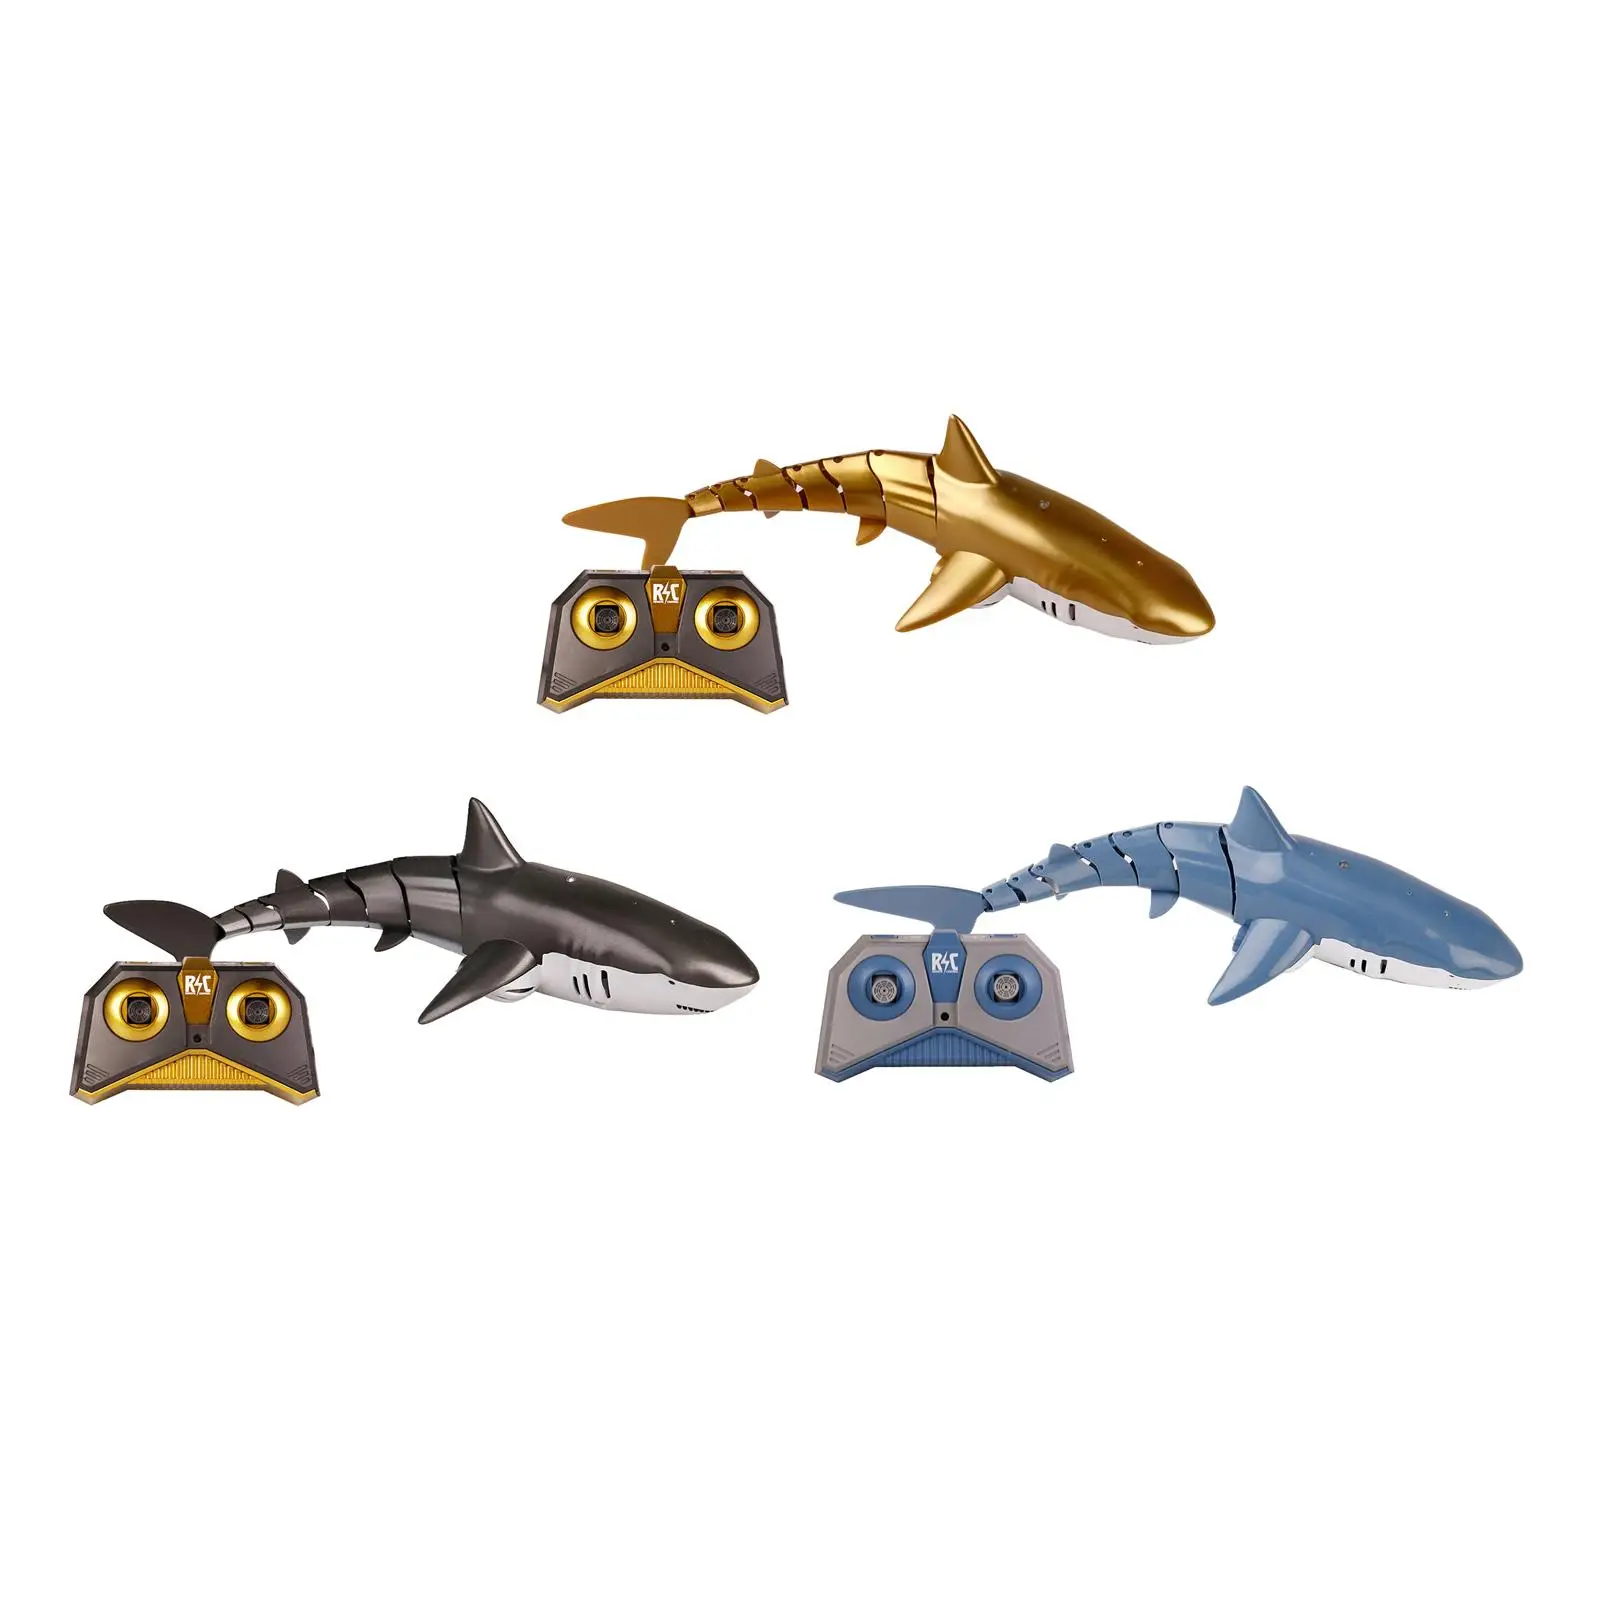 Waterproof Remote Control Mini Shark Electric Toy RC Boat Swinging Shark Toy